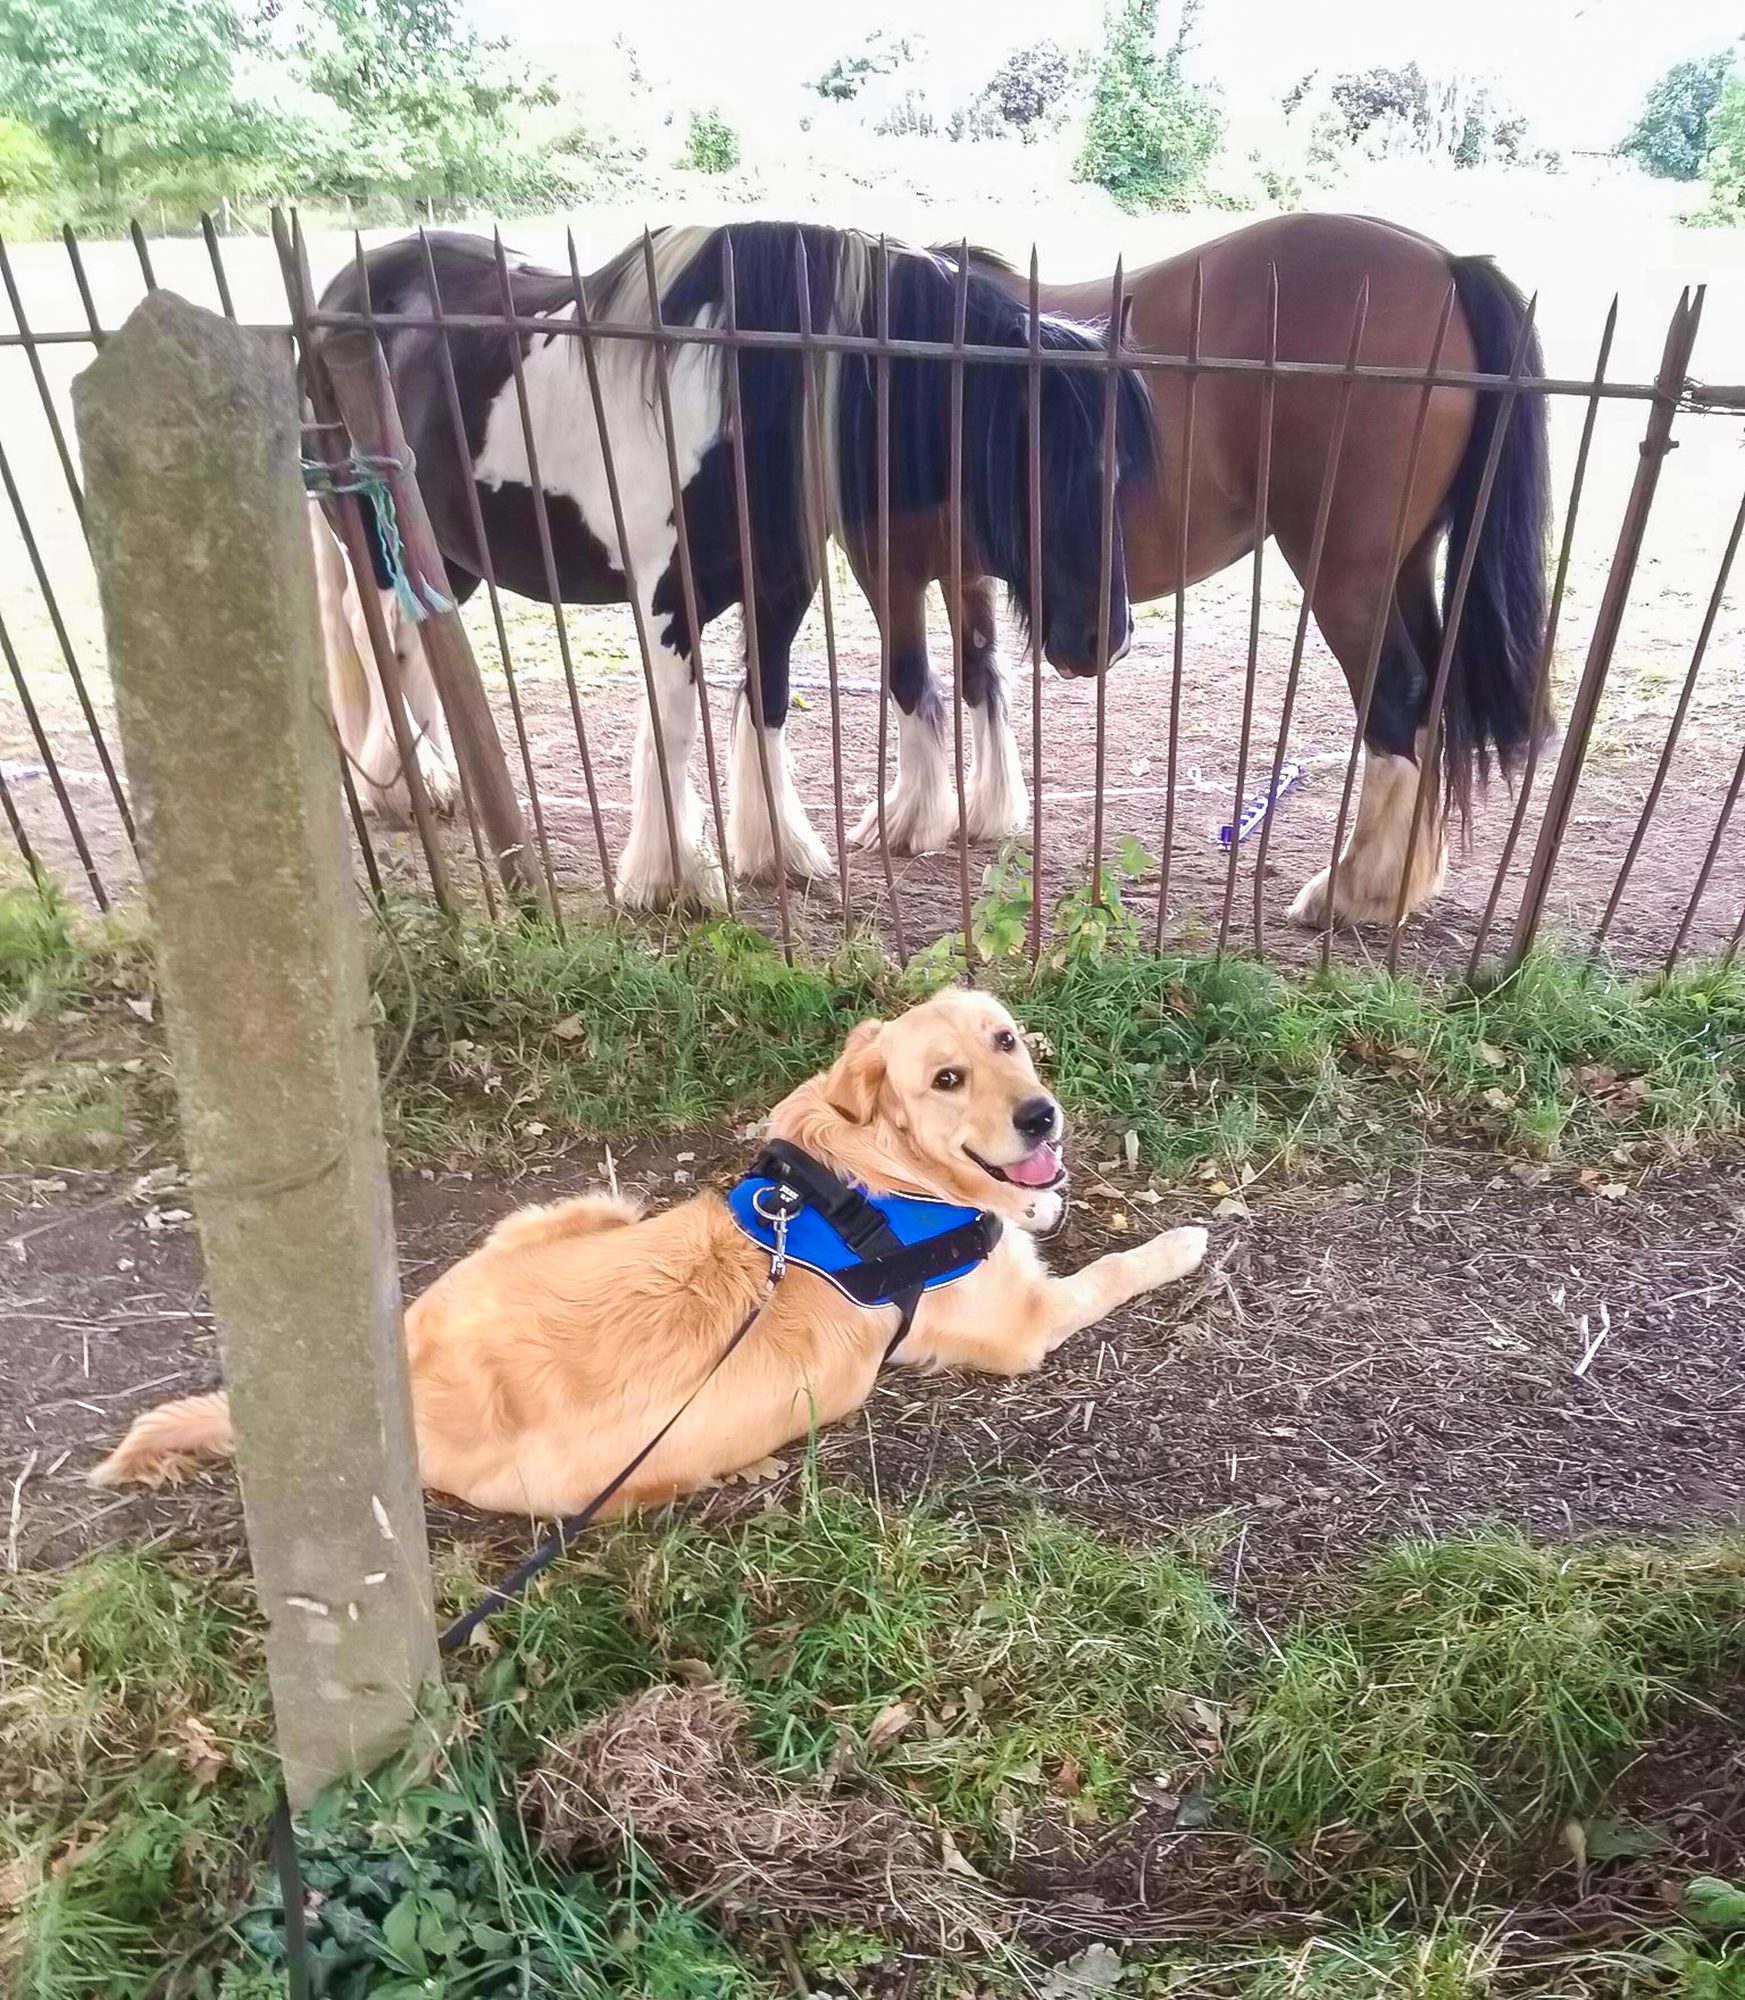 Monty the dog with ponies